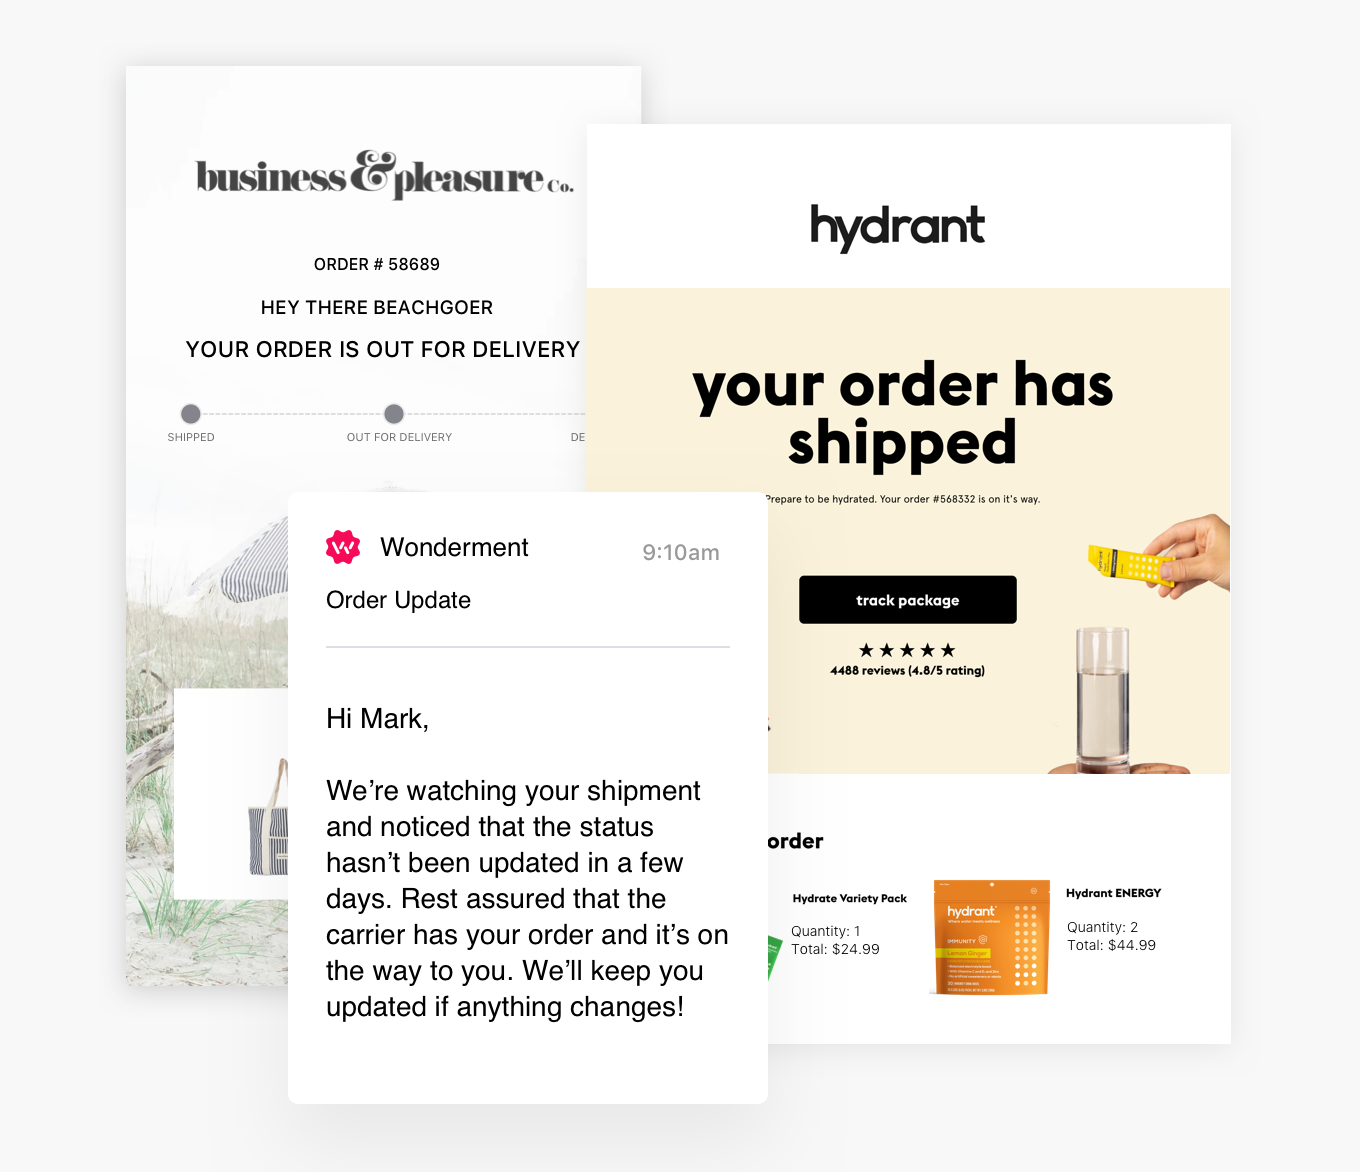 hydrant order tracking page